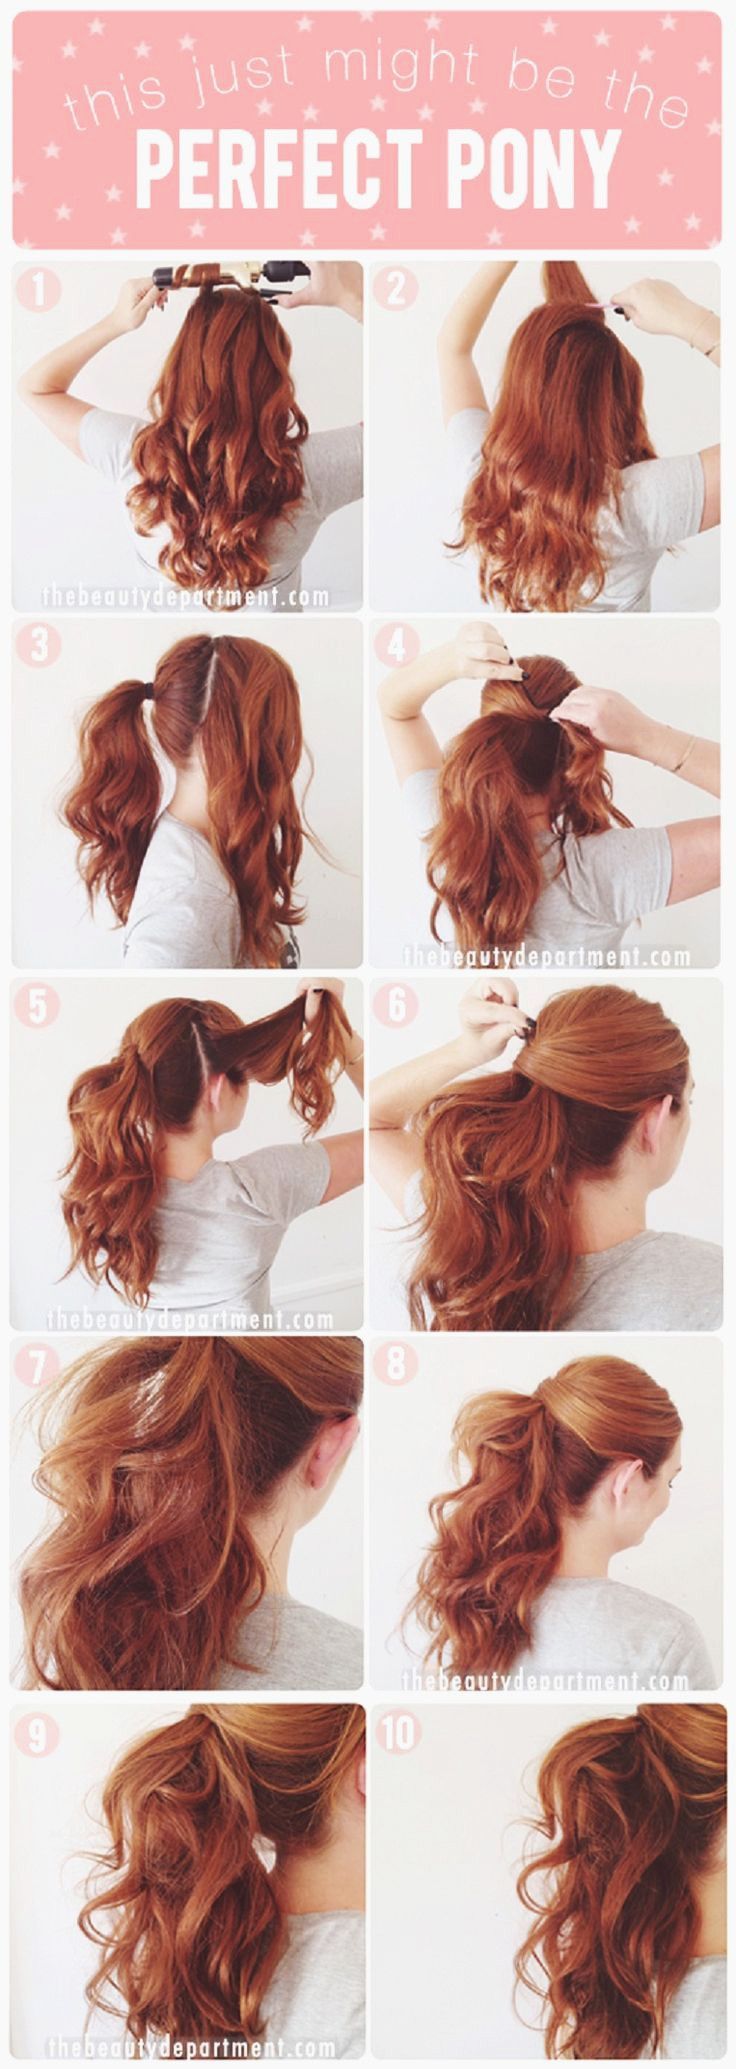 10 Lovely Ponytail Hair Ideas For Long Hair – Page 30 of 31 – HairPush